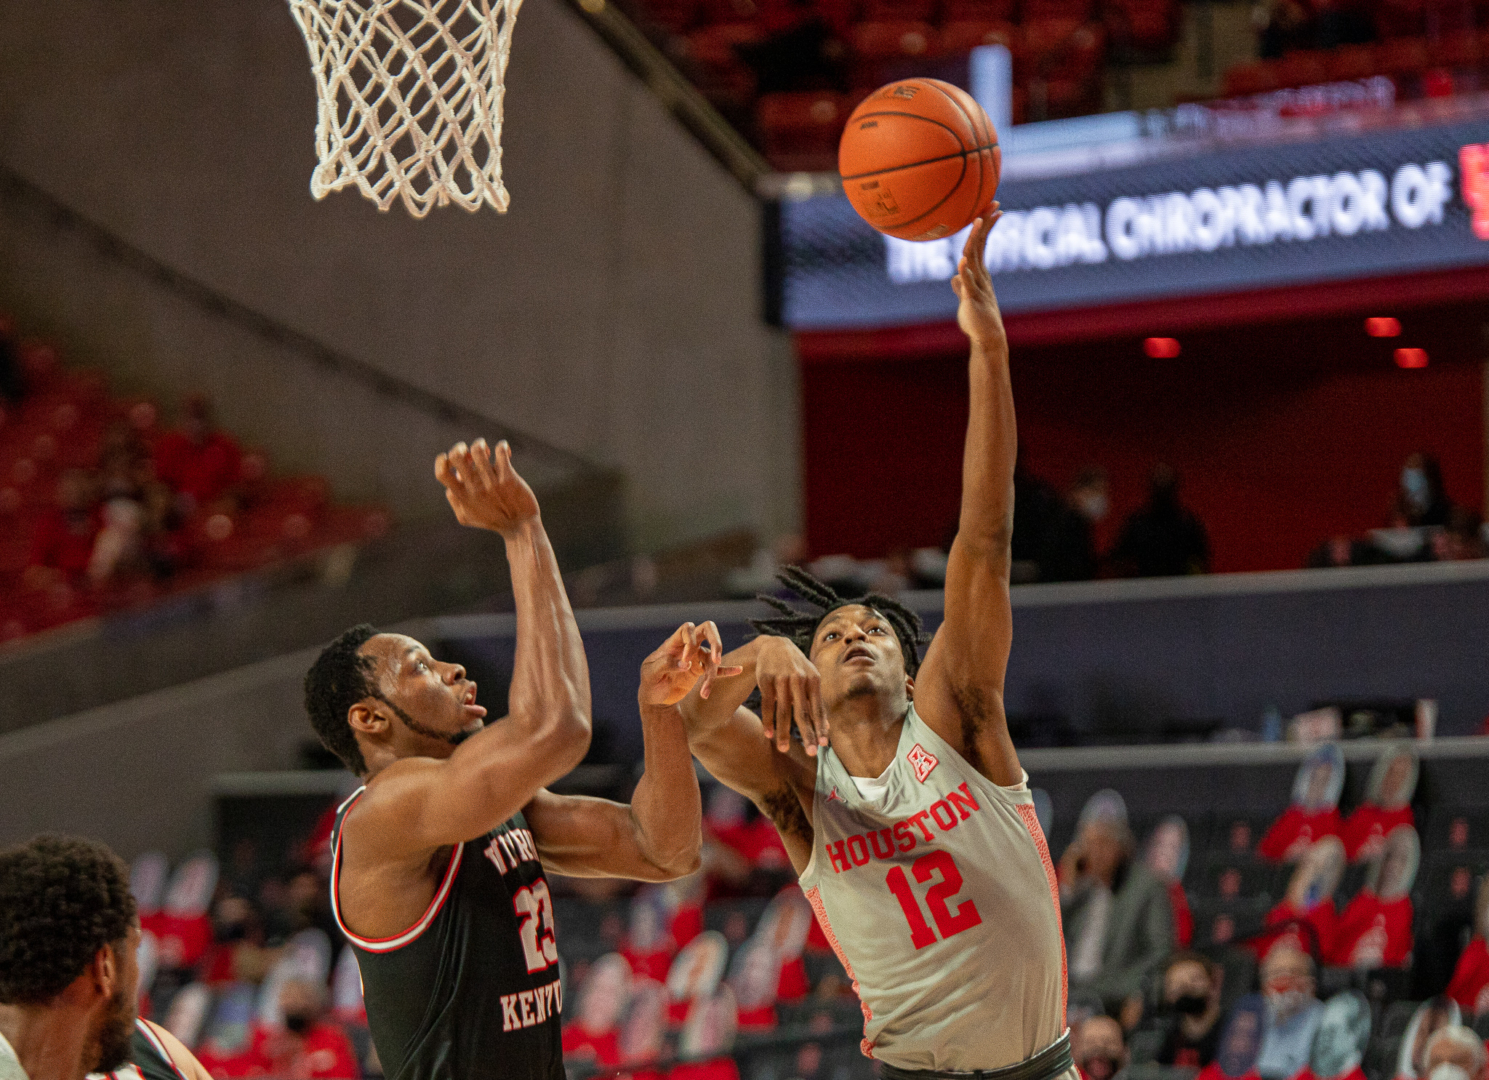 UH men's basketball guard Tramon Mark (12) eases his way around Western Kentucky center Charles Bassey for the layup on Feb. 25 at Fertitta Center. UH will host USF on Sunday. | Andy Yanez/The Cougar